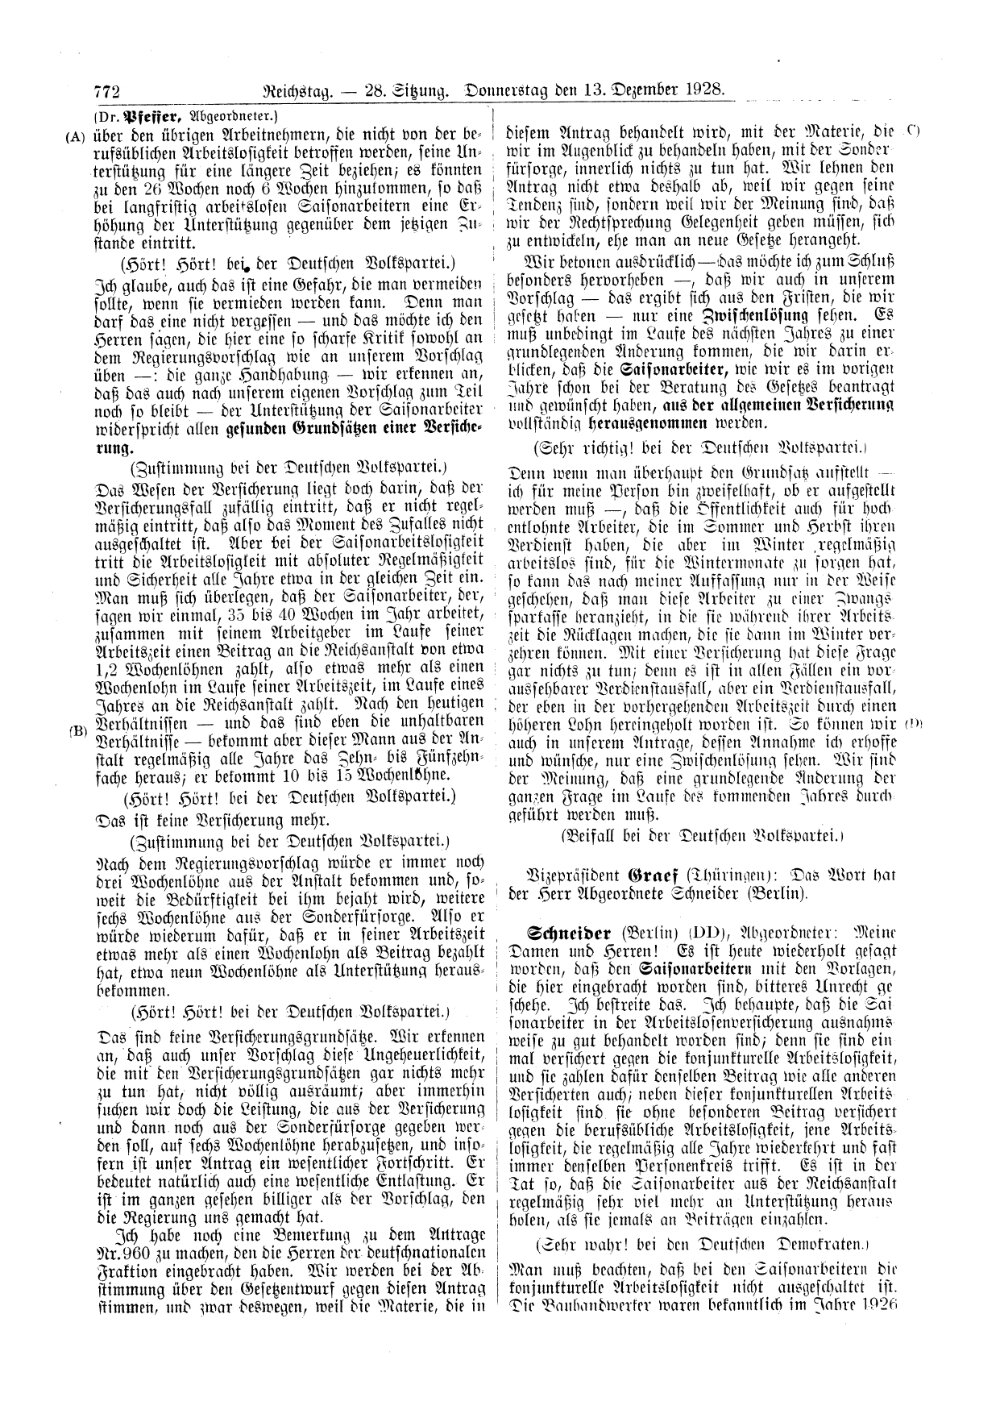 Scan of page 772